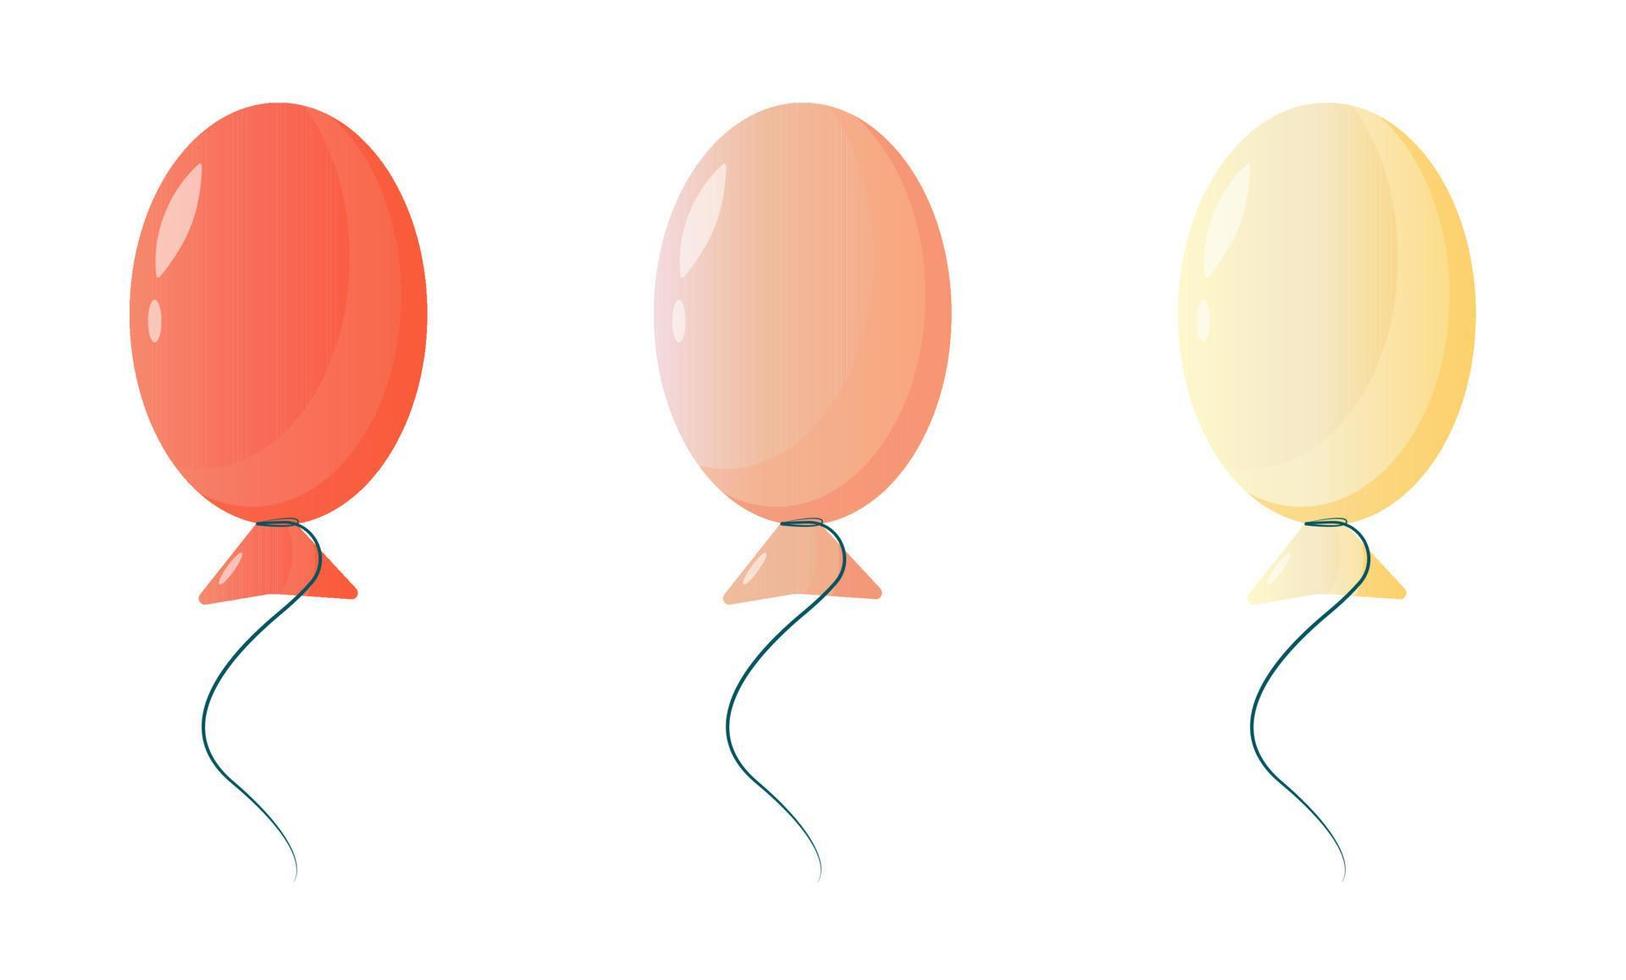 Collection of cartoon balloons for decorating a festive party, wedding, birthday, corporate party, anniversary. Vector simple cartoon illustration. The concept of holiday decoration